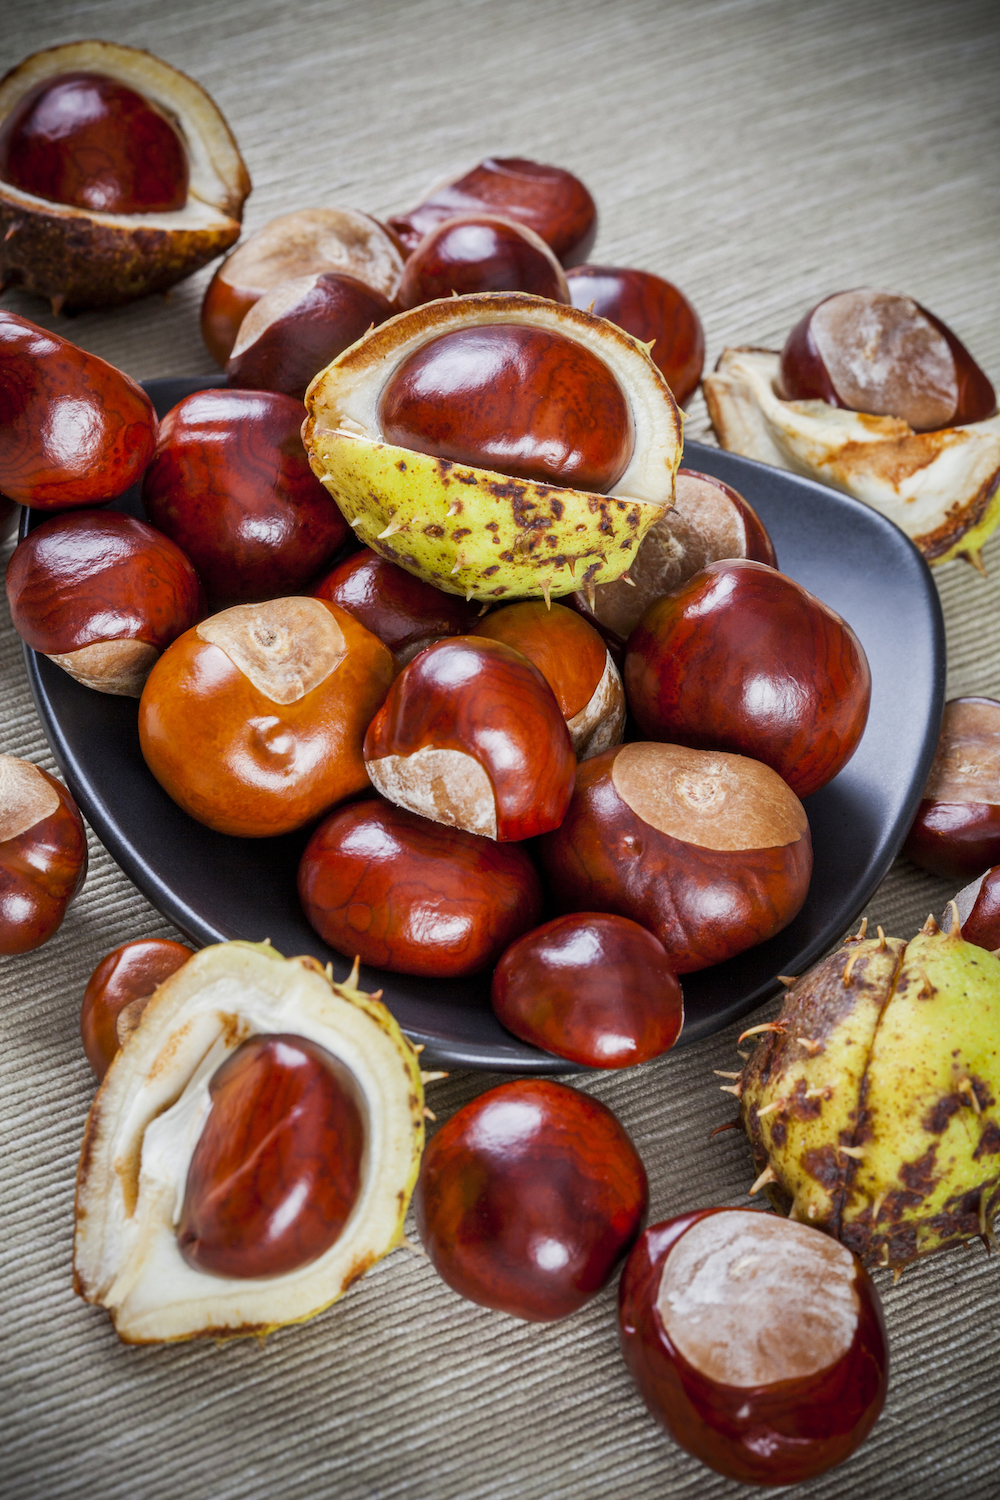 Chestnuts and Ways to Cook Them - Vintage Recipes and Cookery